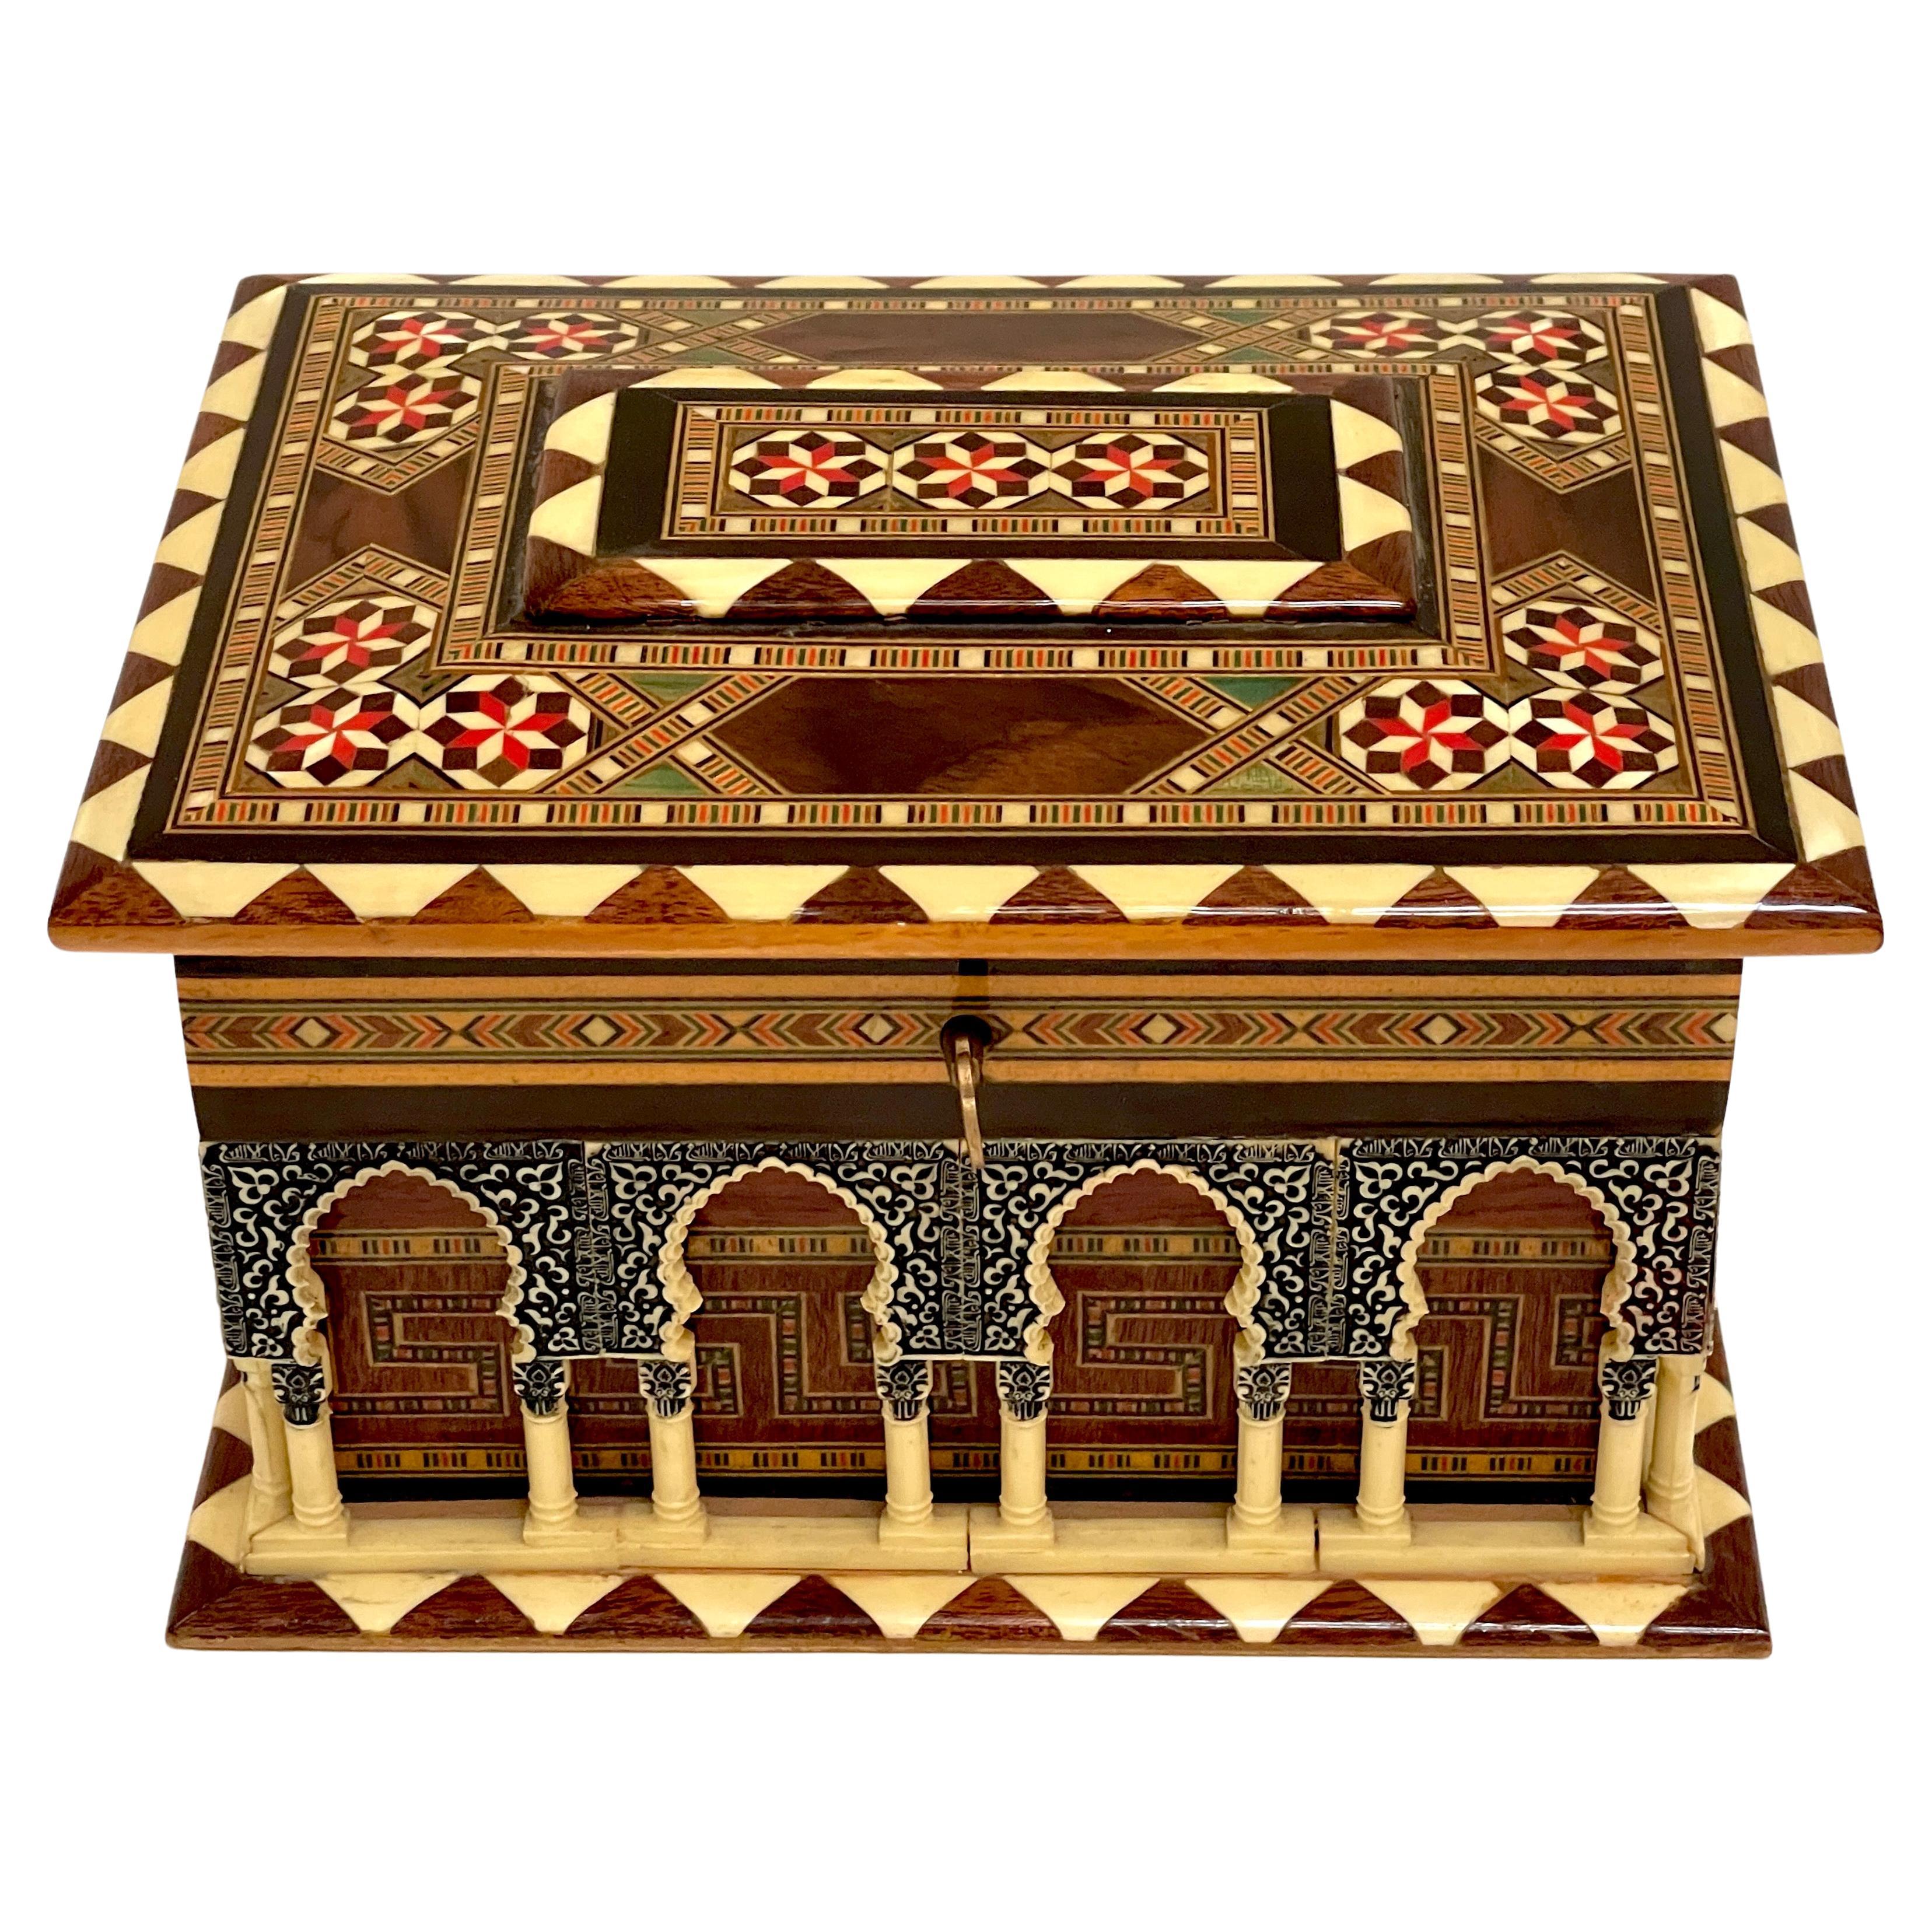 Architectural Model Box of the Alhambra Palace, with Key